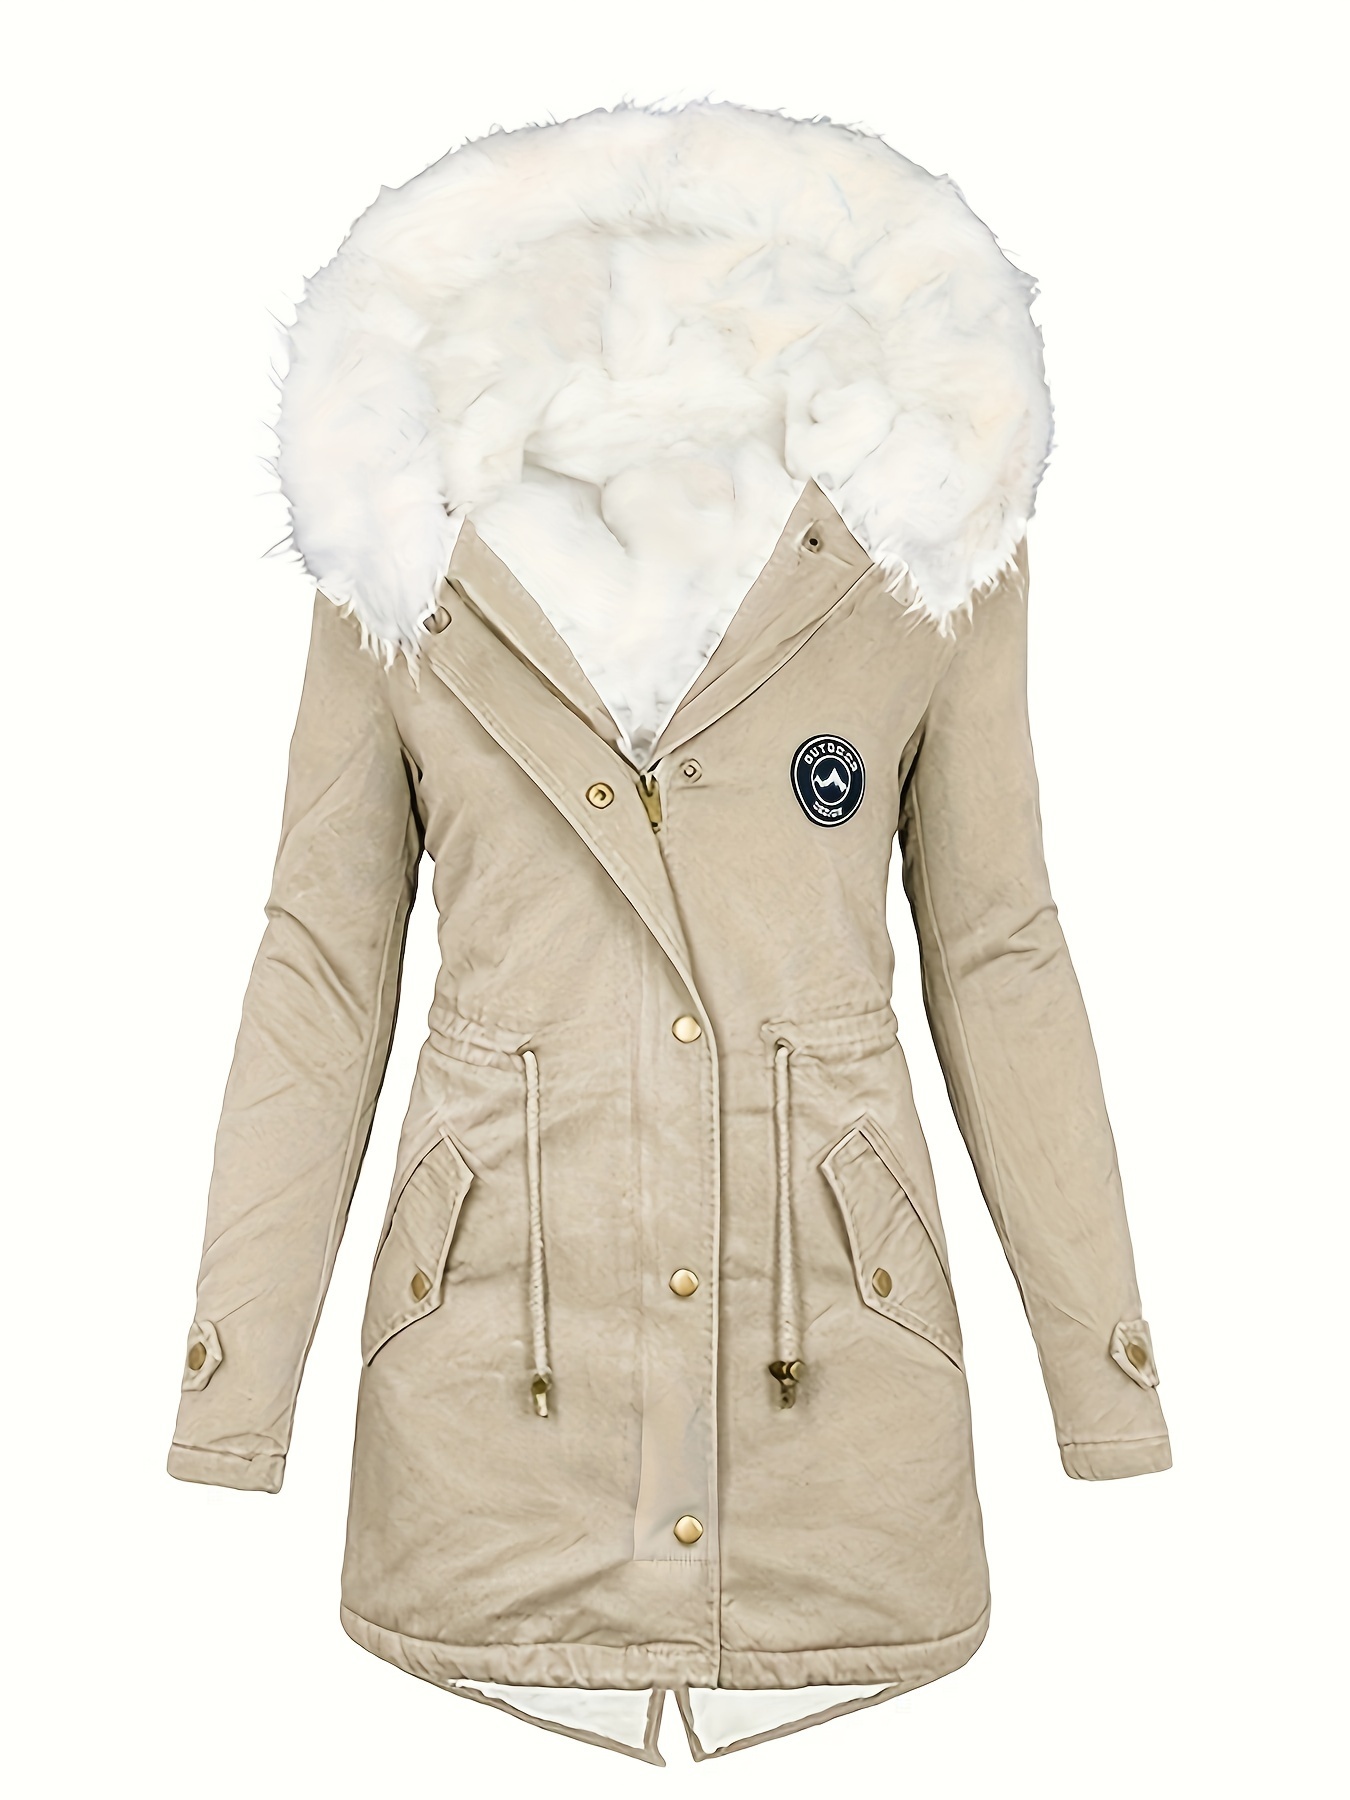 Faux fur. Casual winter jacket slightly more stylish and have more comfort  features such as larger hood fur trim on hood. Fashion girl winter clothes. Fashion  coat and hat. Fashion trend. Warming